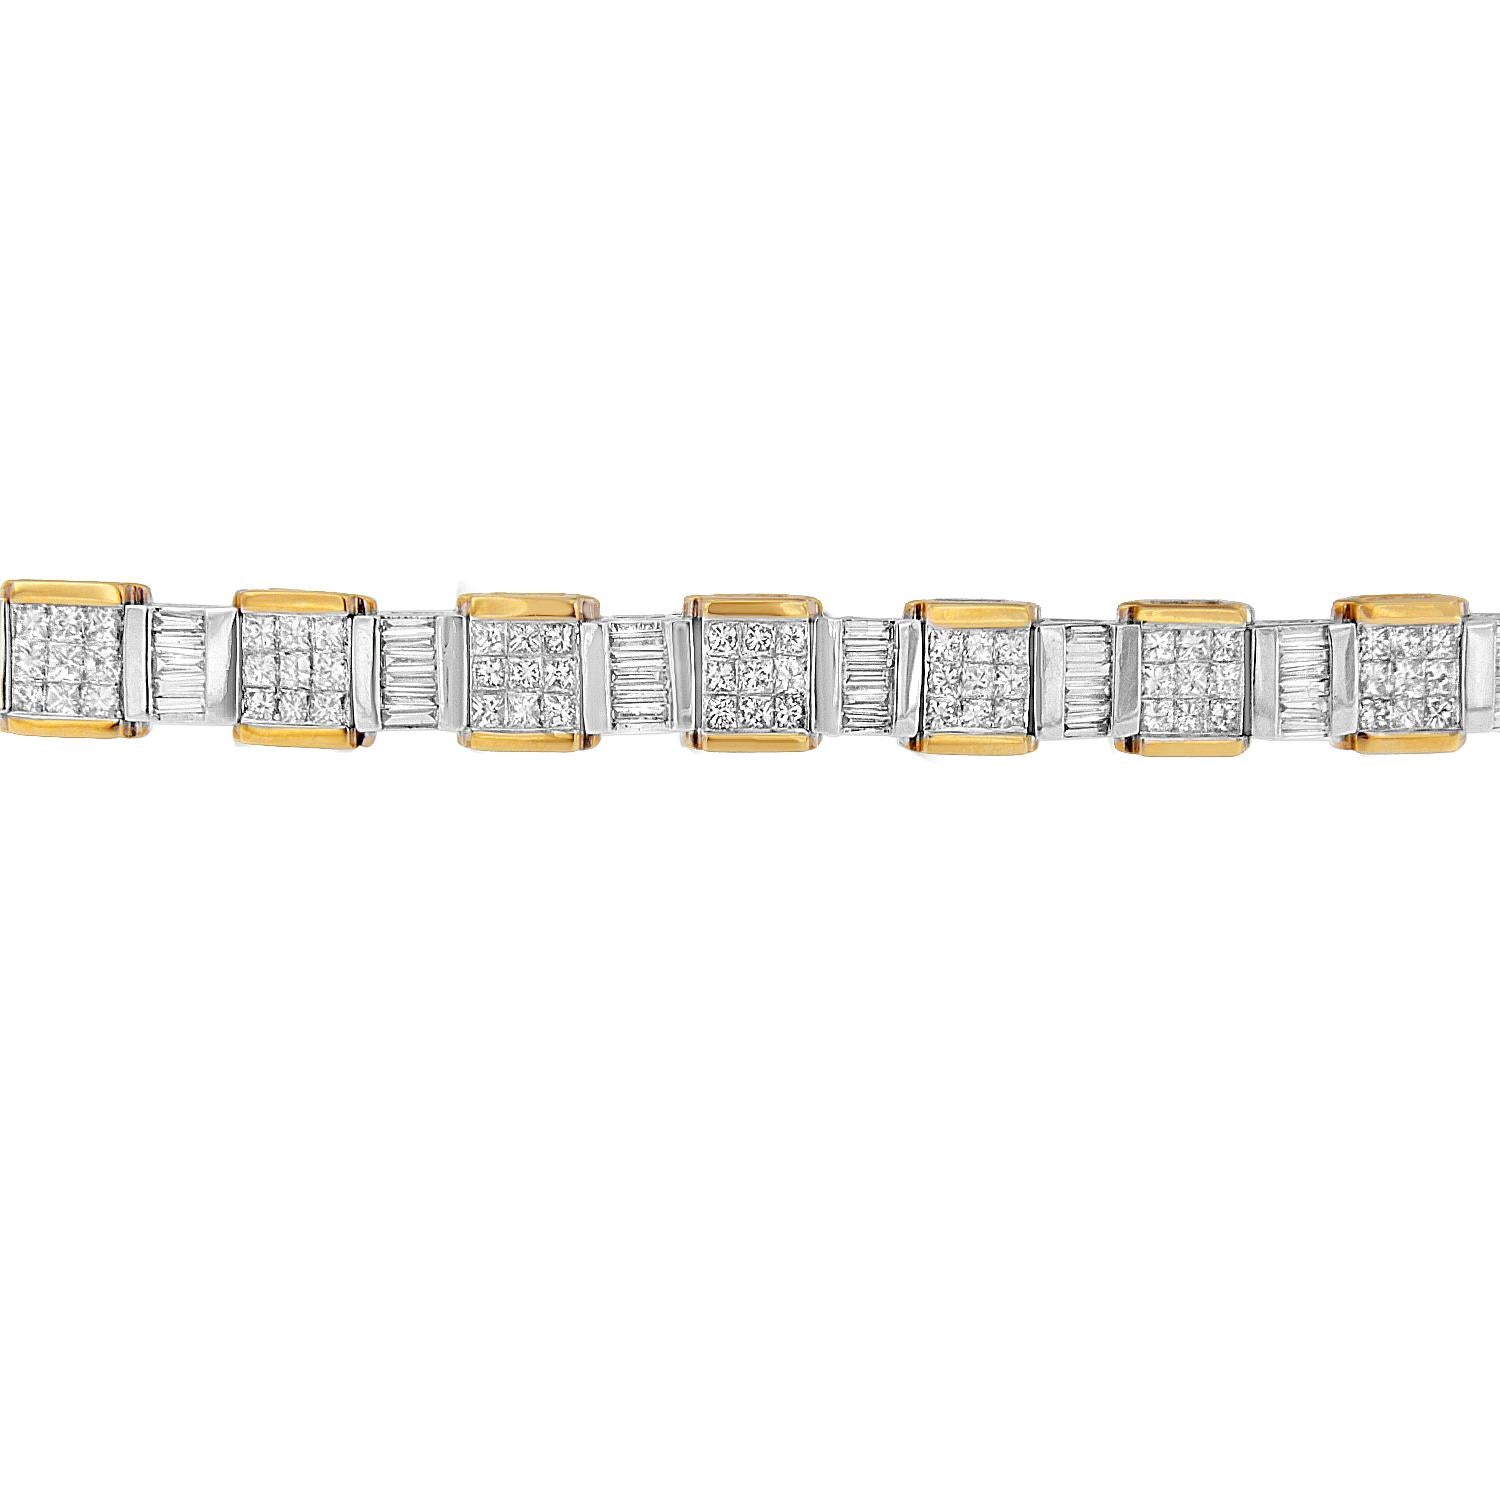 A stylish look just for her, this 14 karats two-toned diamond bracelet is sure to take her breath away. Fashioned in sterling silver and yellow gold, the timeless design features sparkling princess and baguette cut diamonds in a channel setting.